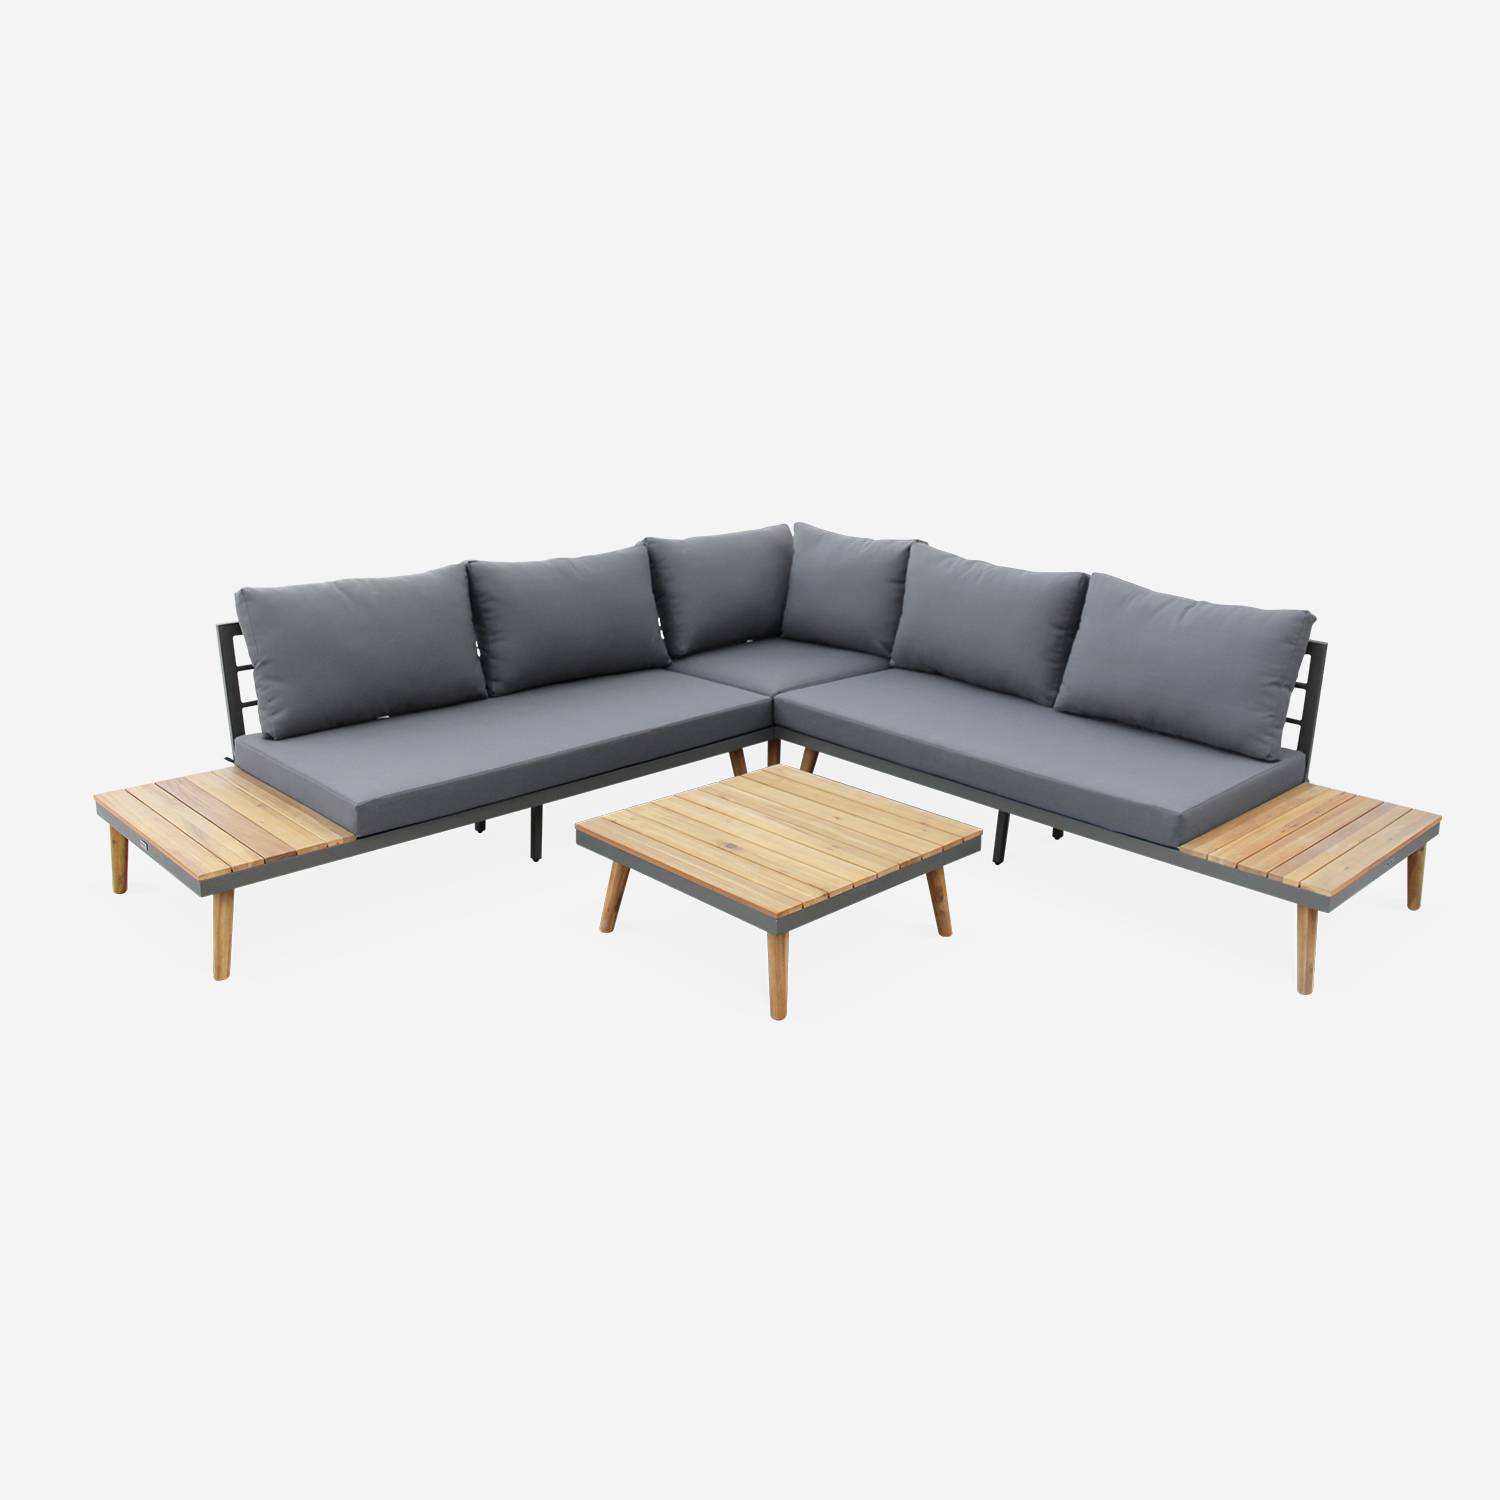 5-seater wooden outdoor sofa - Buenos Aires - Corner sofa with coffee and side tables in acacia wood, aluminium frame, Scandinavian-style legs - Buenos Aires - Grey cushions, Grey structure,sweeek,Photo2